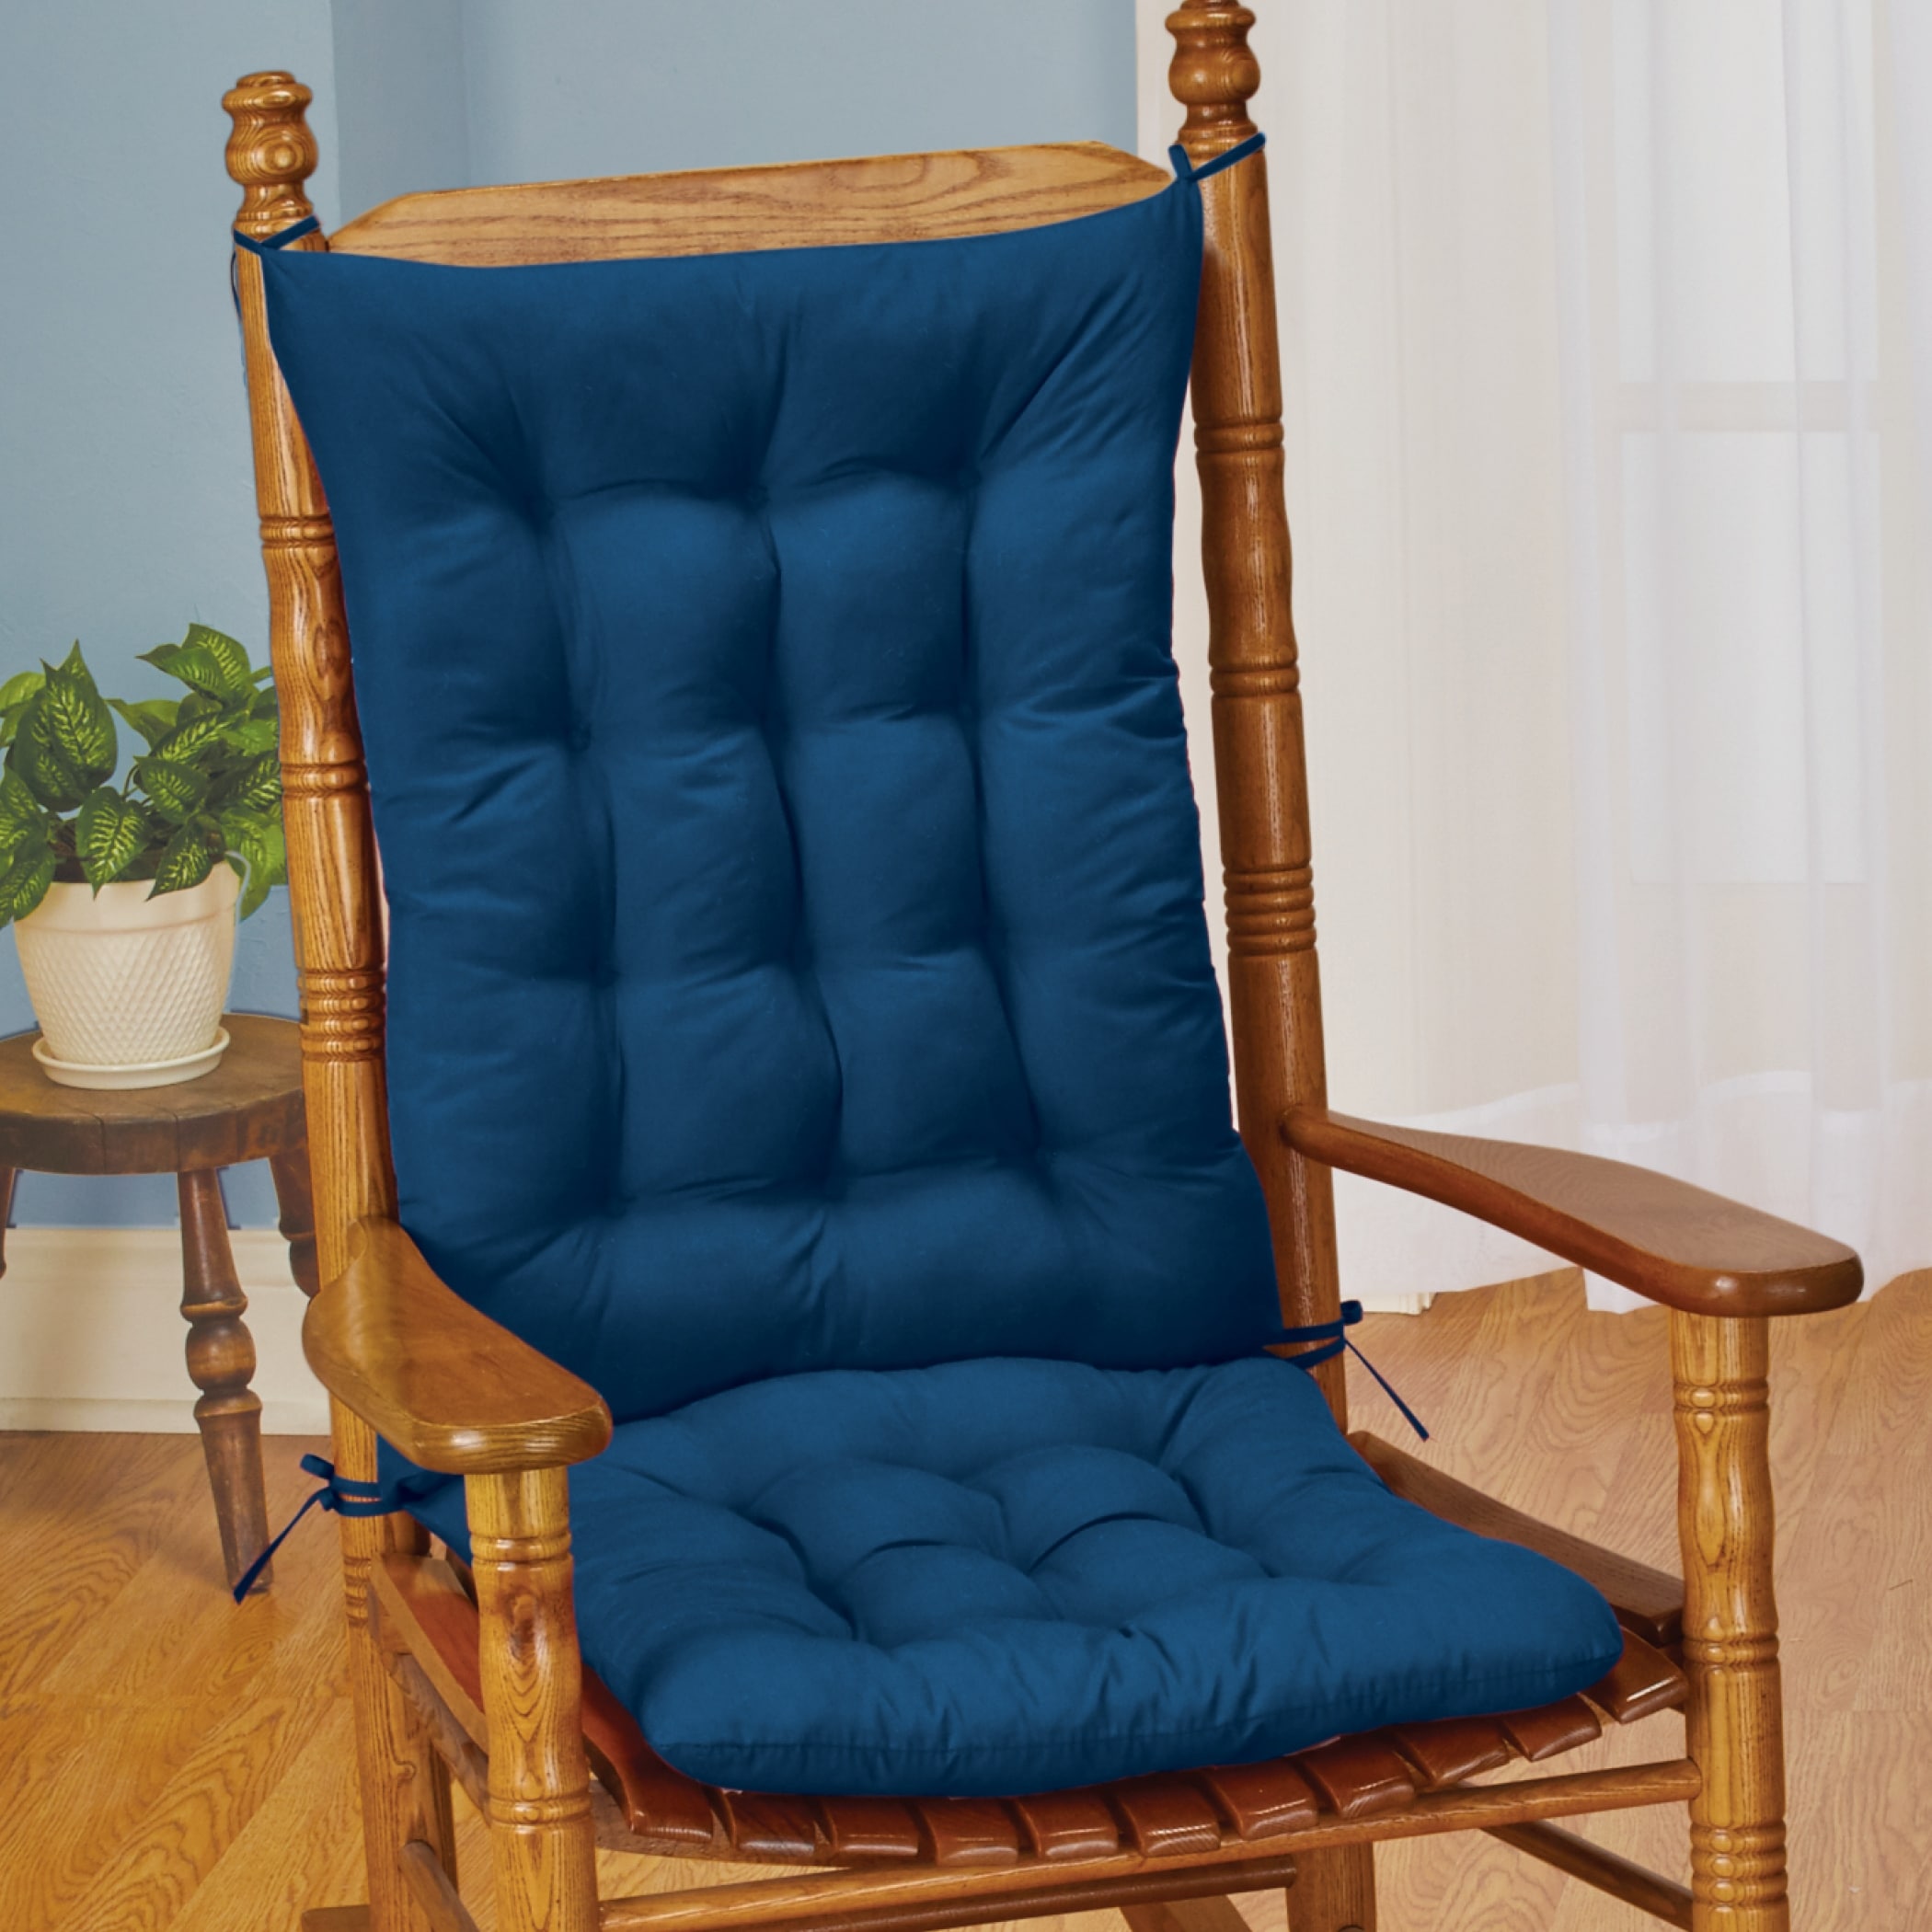 https://ak1.ostkcdn.com/images/products/is/images/direct/1409071a8cac24bdeb6c879b8c1f0fea10ccf4ea/Quilted-Chair-Cushion-Set---Perfect-for-Rocking-Chairs%2C-Dining-Chairs-or-Armchair.jpg